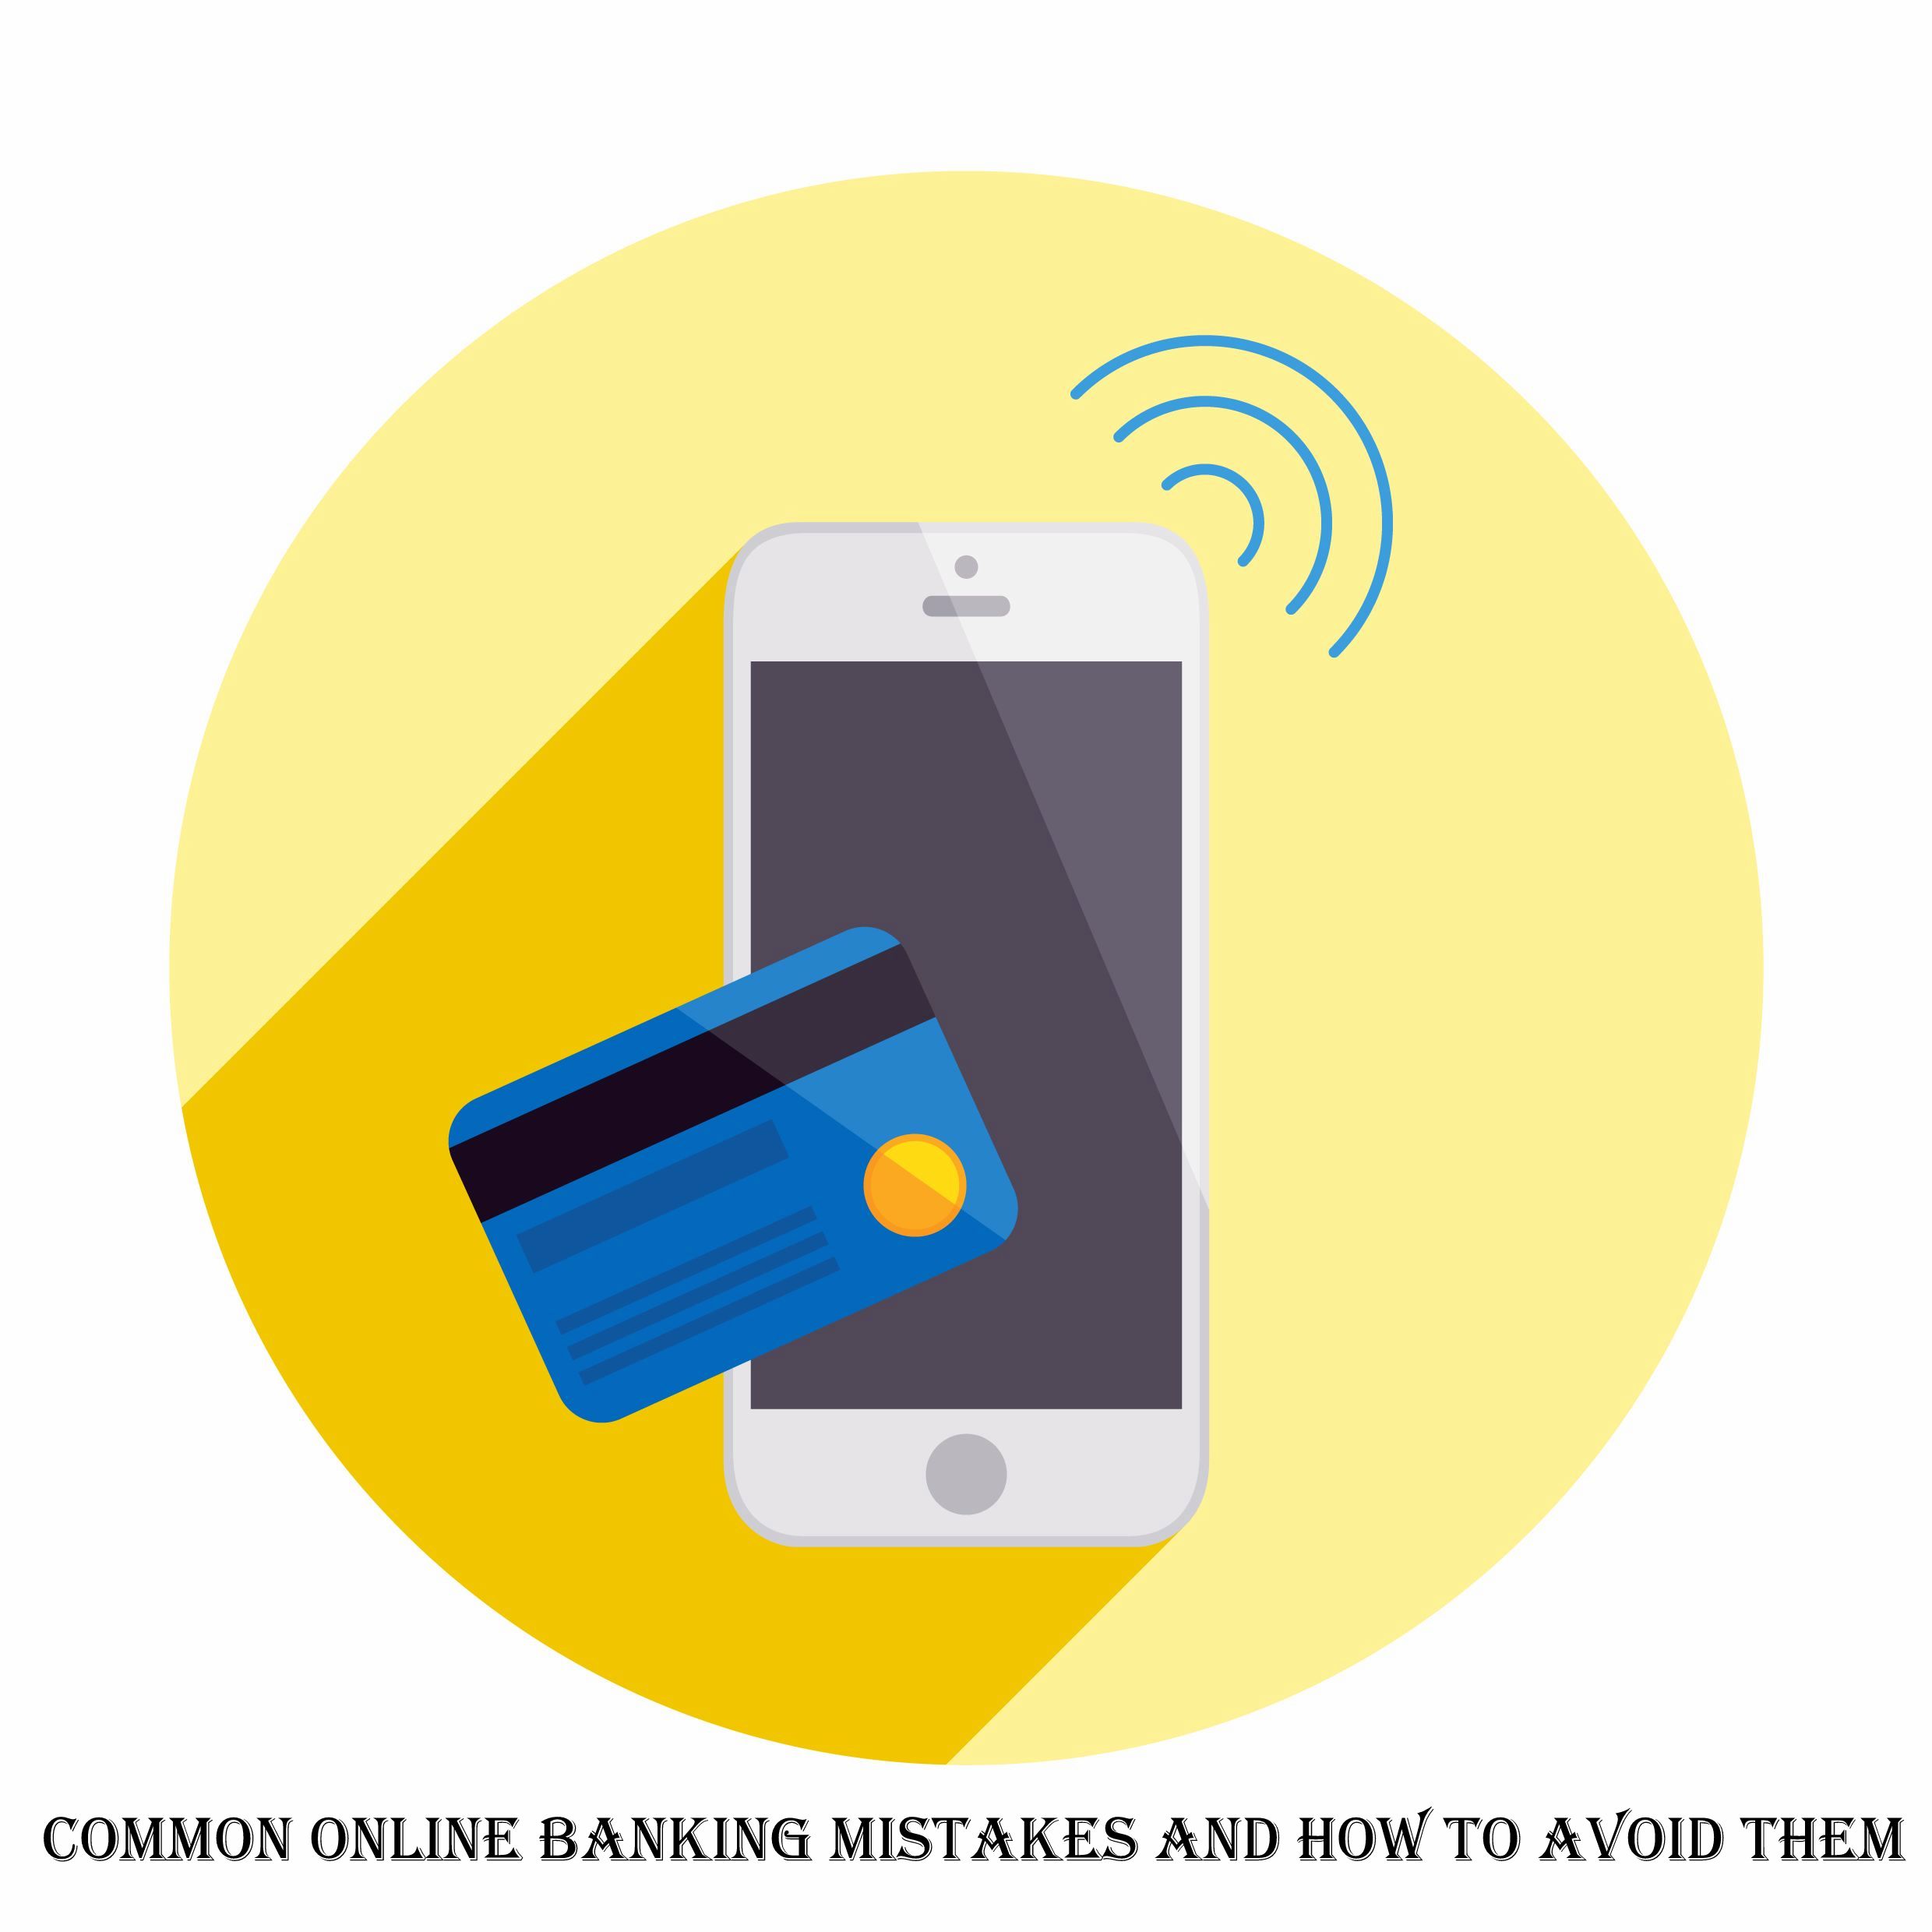 Common Online Banking Mistakes and How to Avoid Them